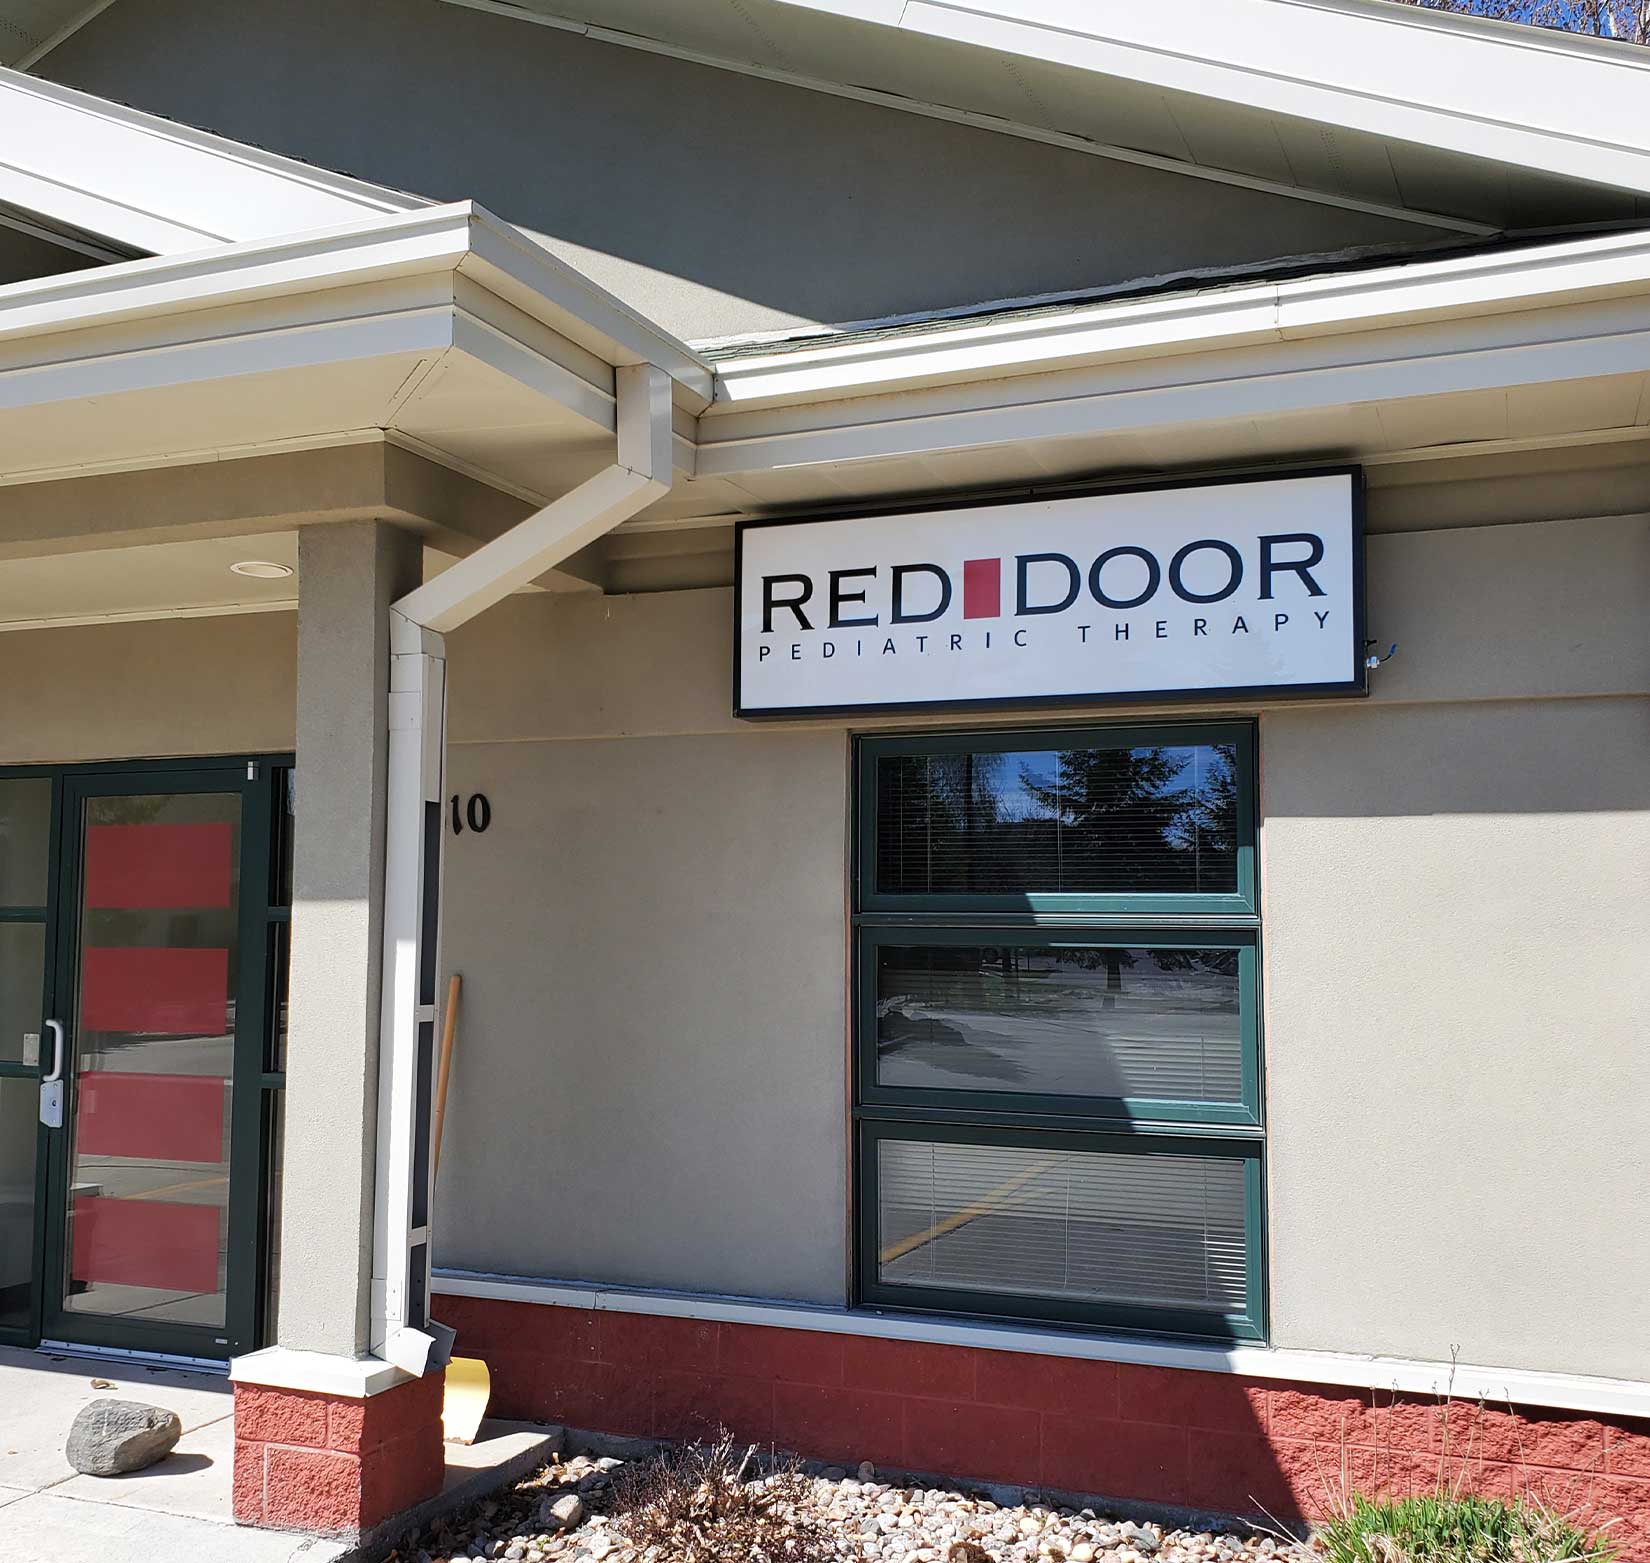 Exterior signage for Red Door Pediatric Therapy